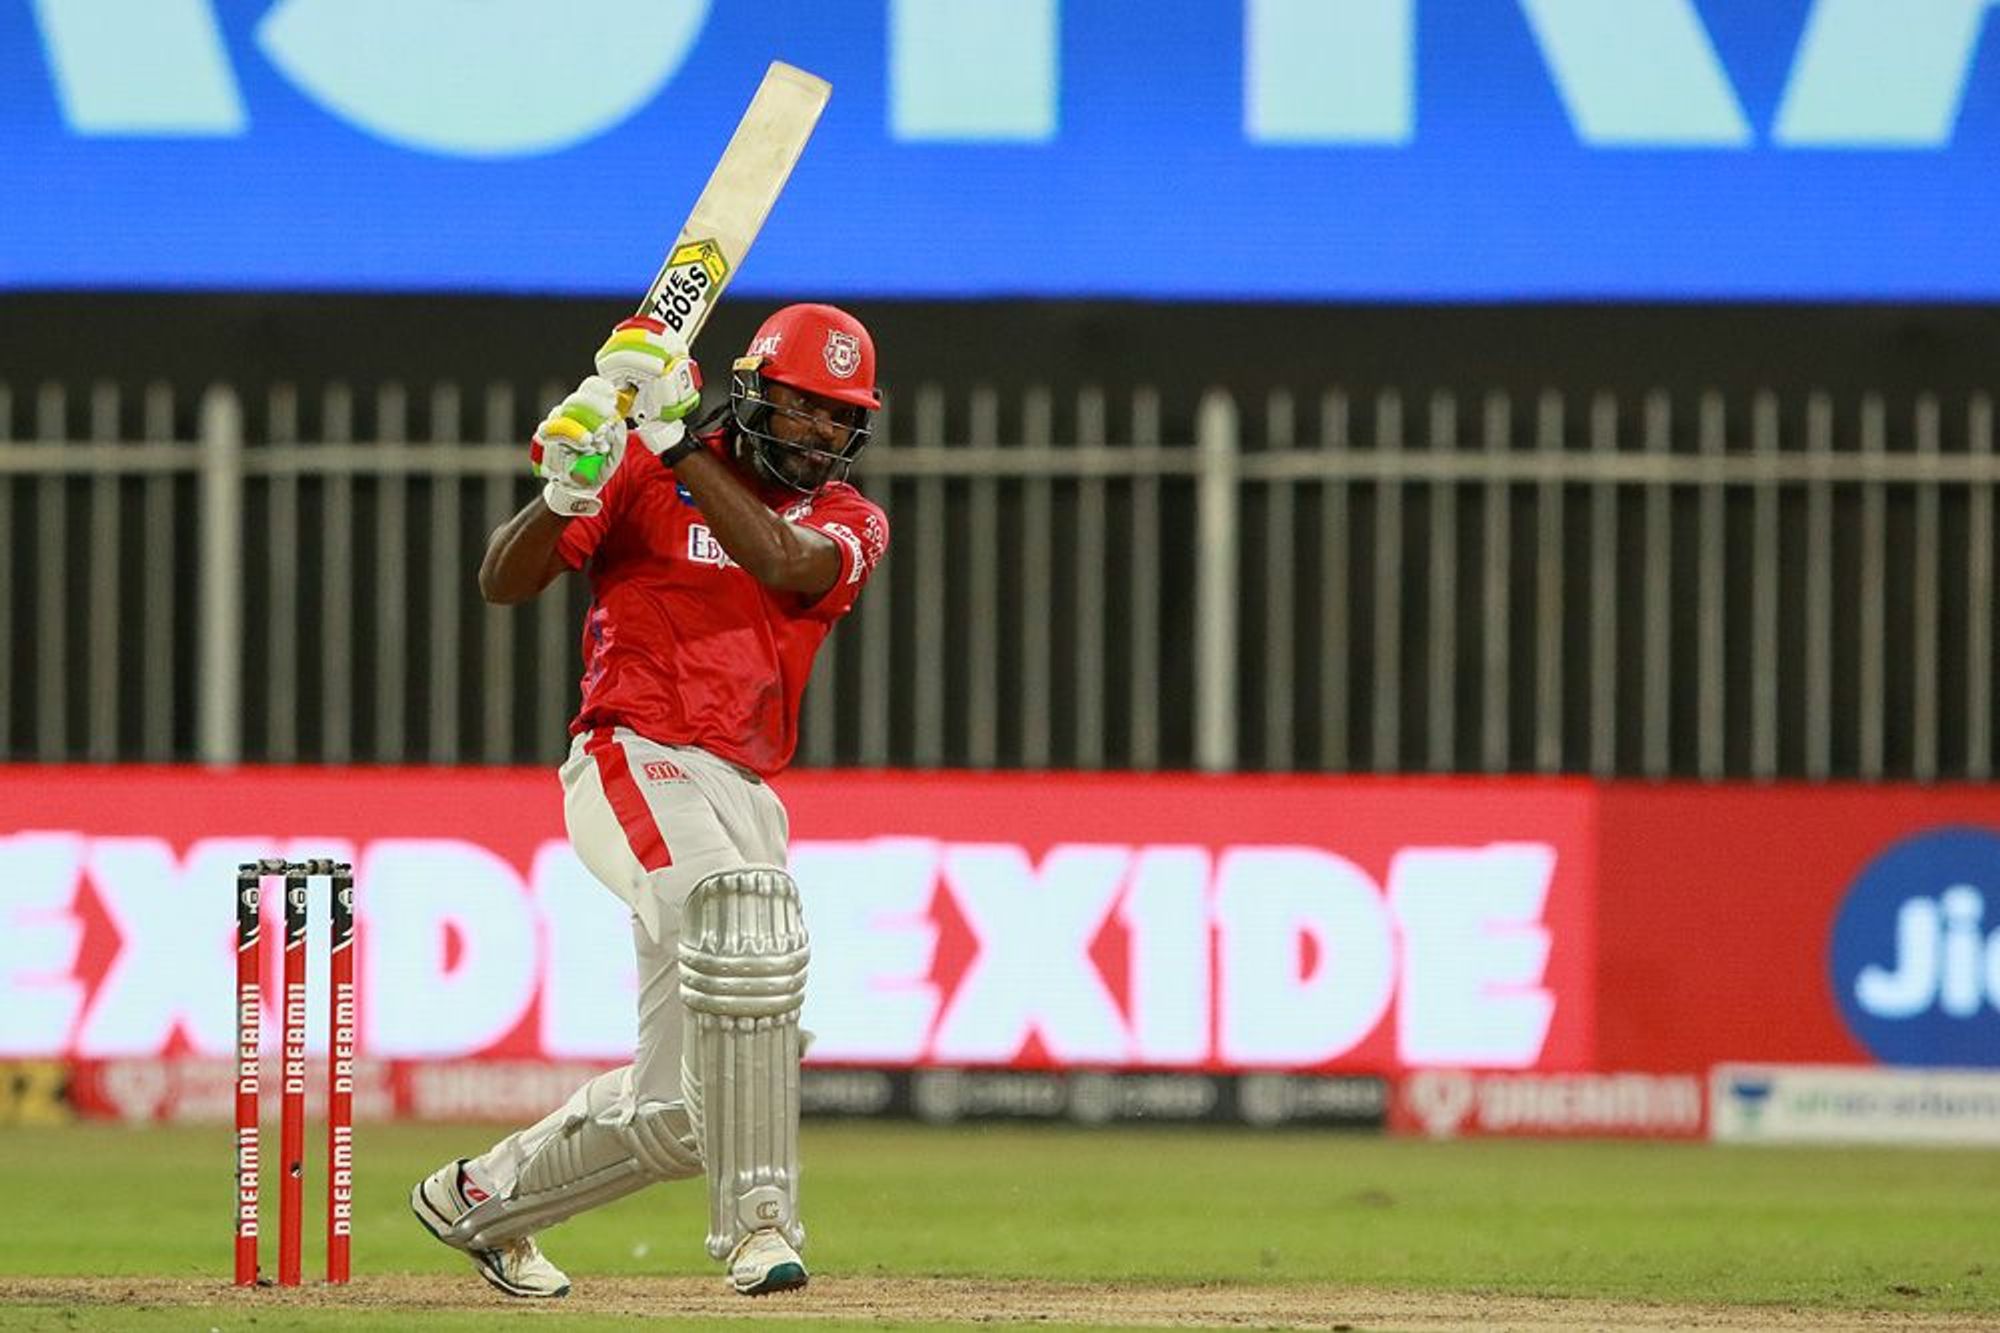 Chris Gayle has been amazing for the KXIP side | BCCI/IPL